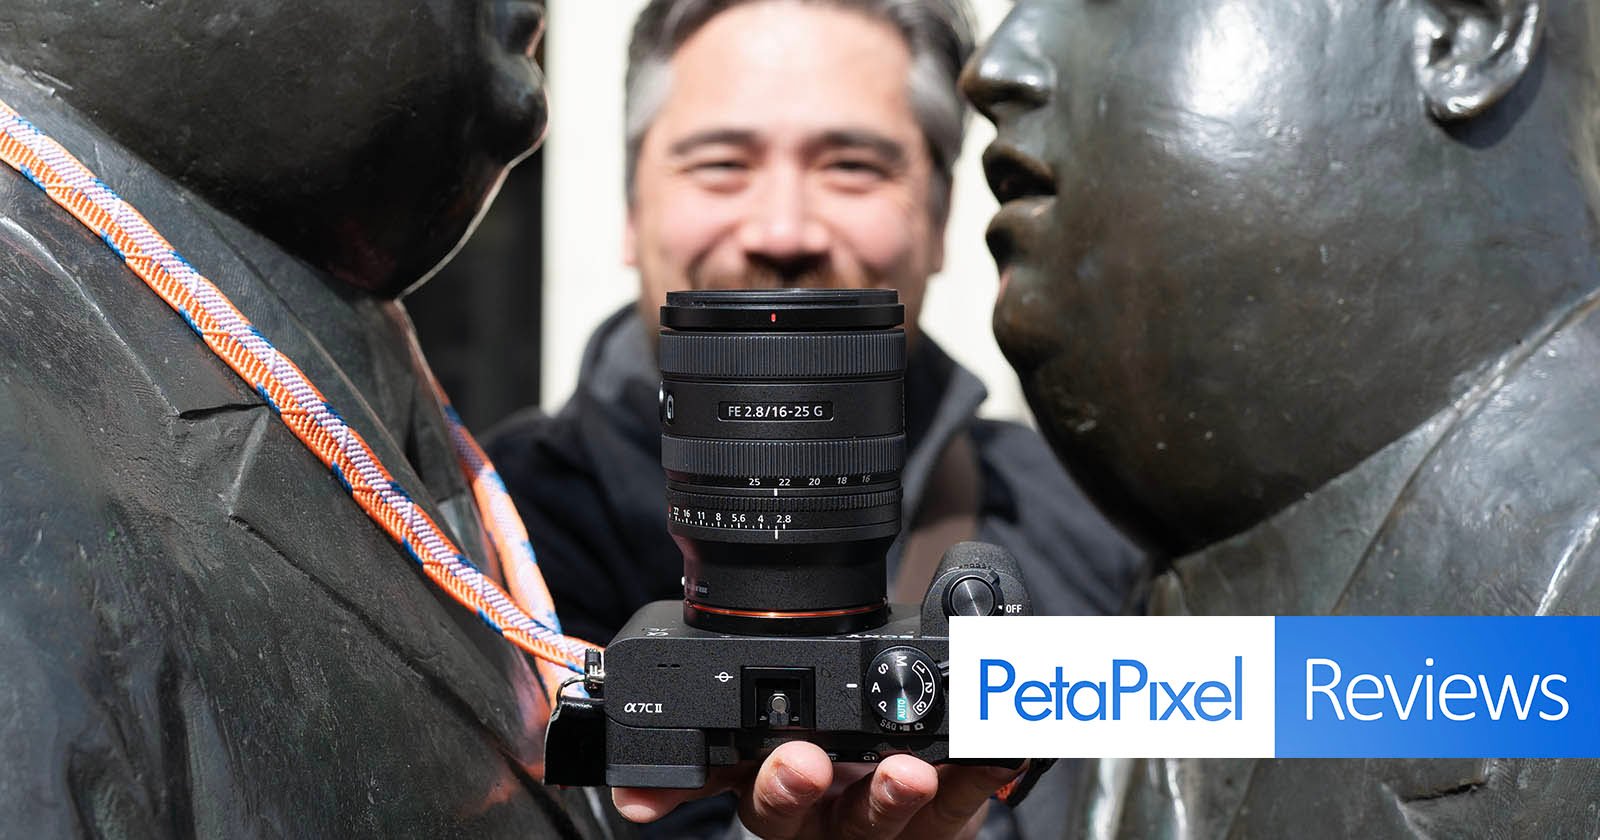 Sony G 16-25mm f/2.8 Review: This is the Wide-Angle Zoom Lens To Get